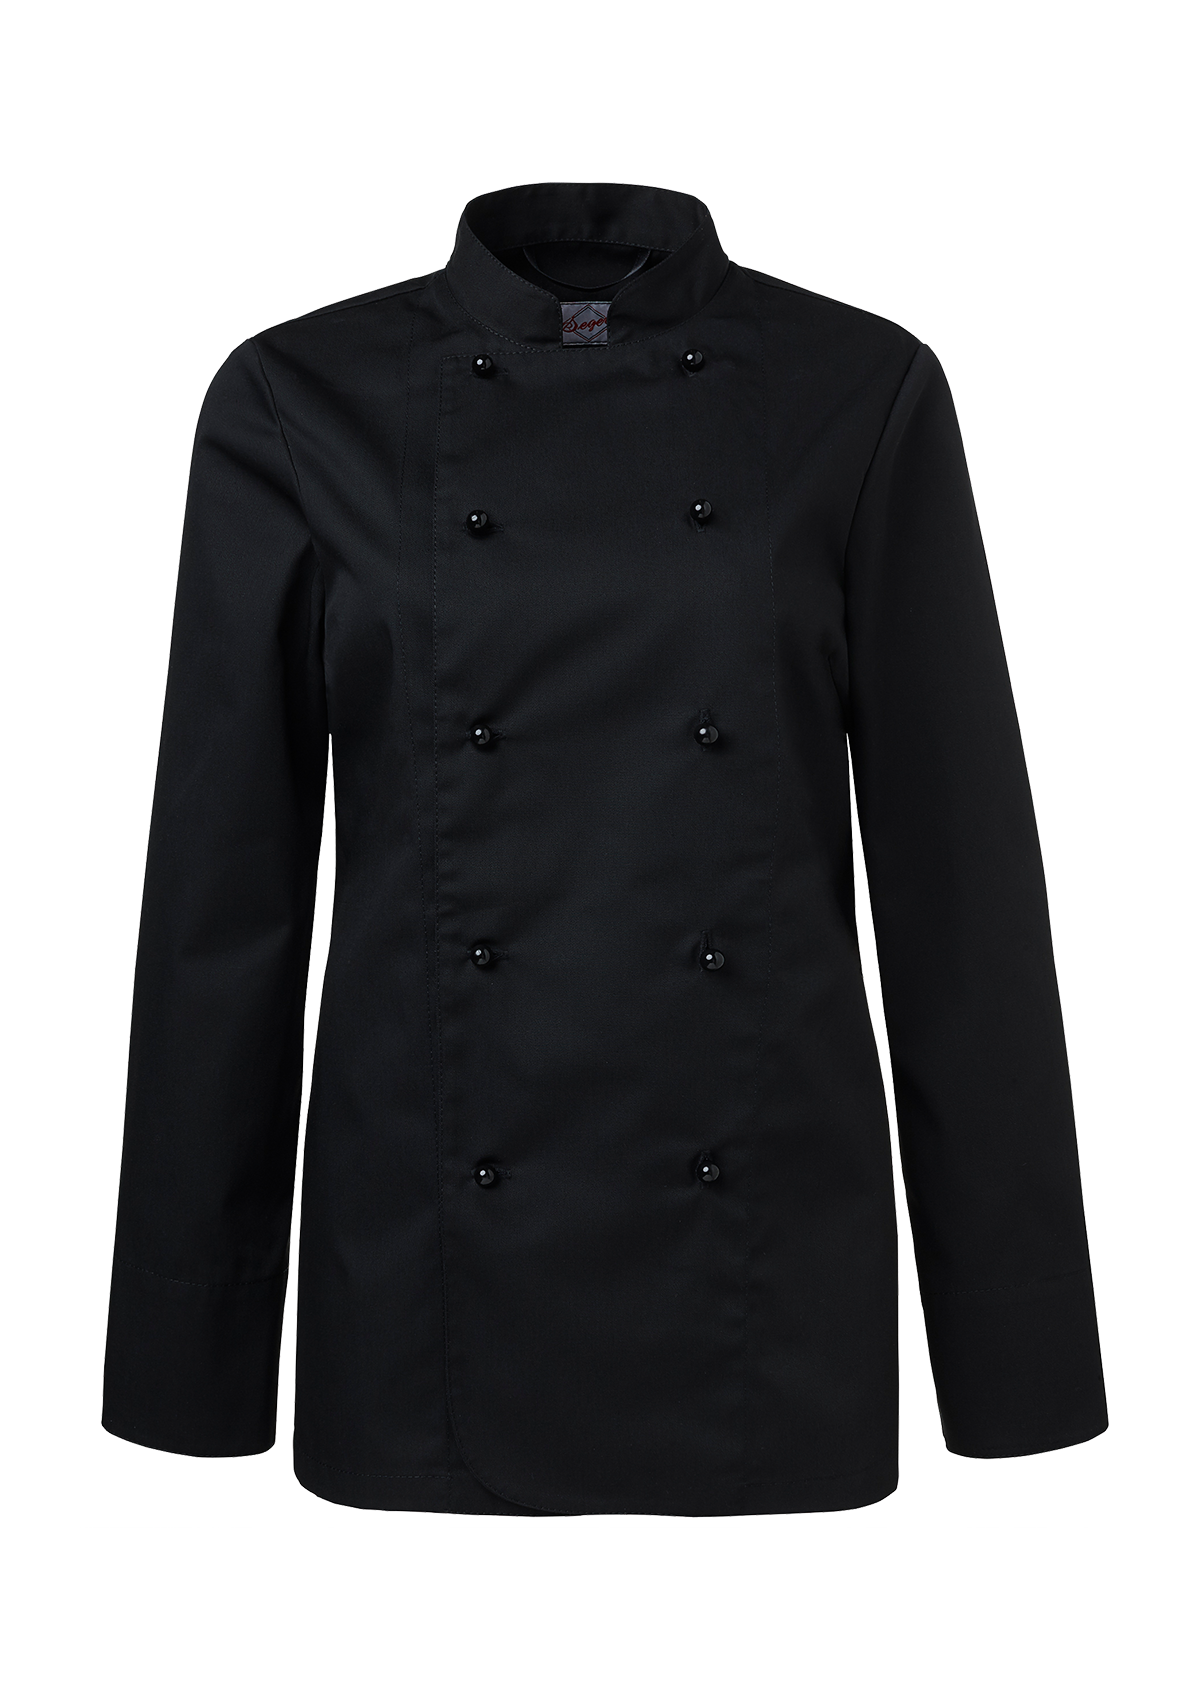 Women's Chef jacket in Classic cut and slightly waisted with long sleeves. Segers | Cookniche